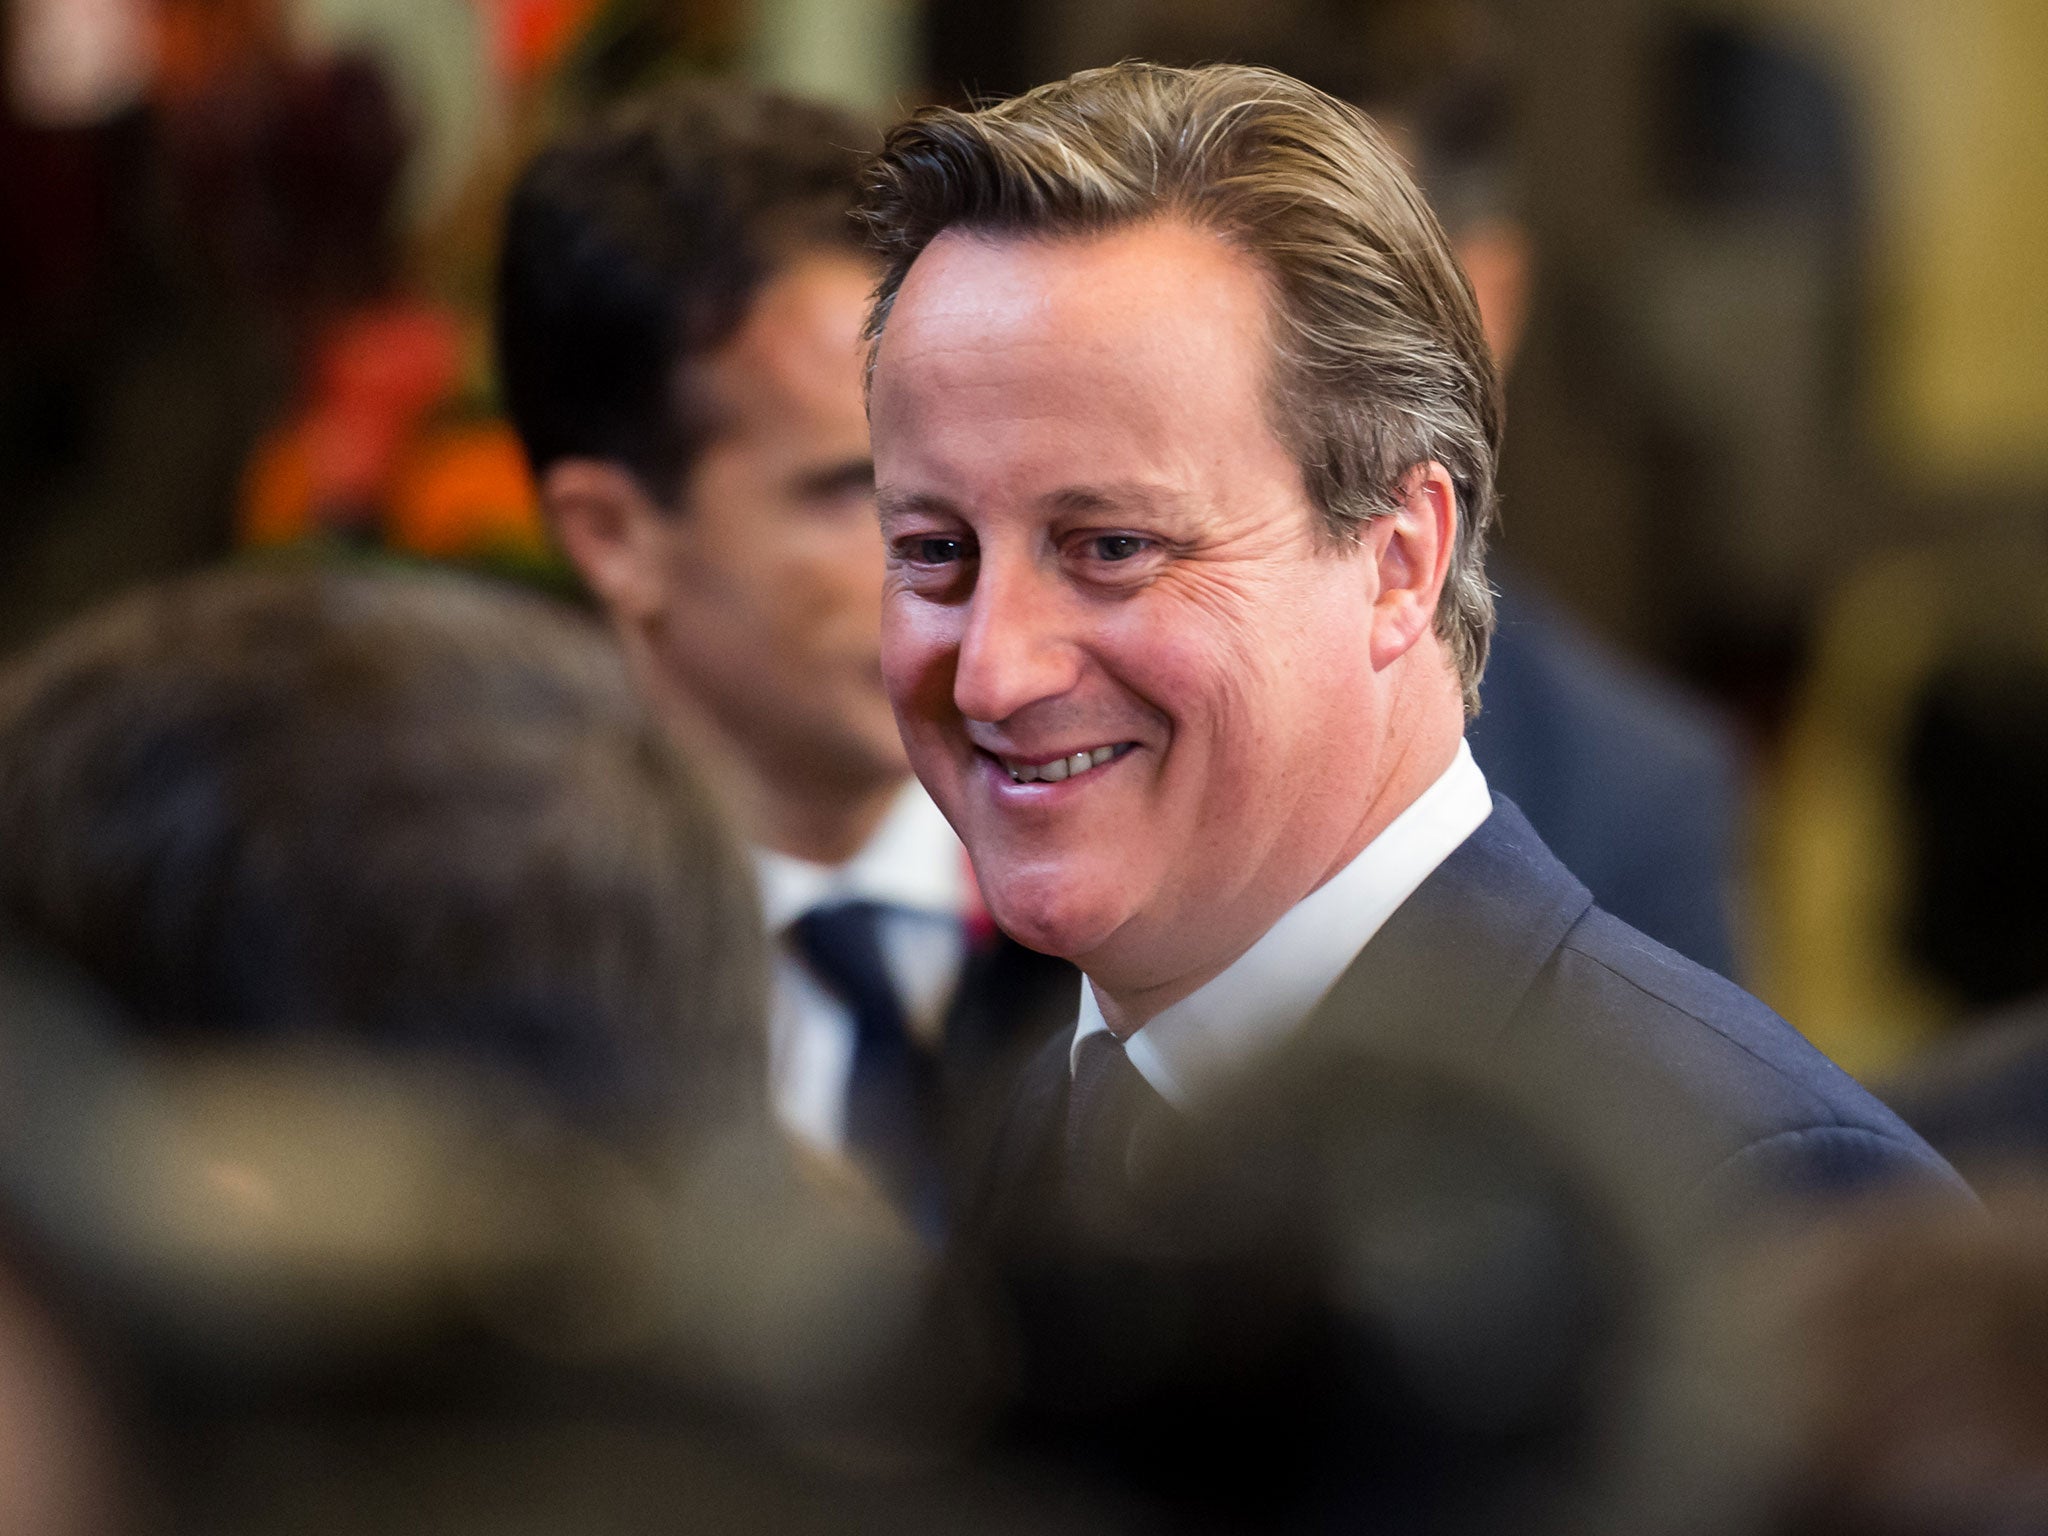 David Cameron will not be among the world leaders at the general debate set to take place at the United Nations